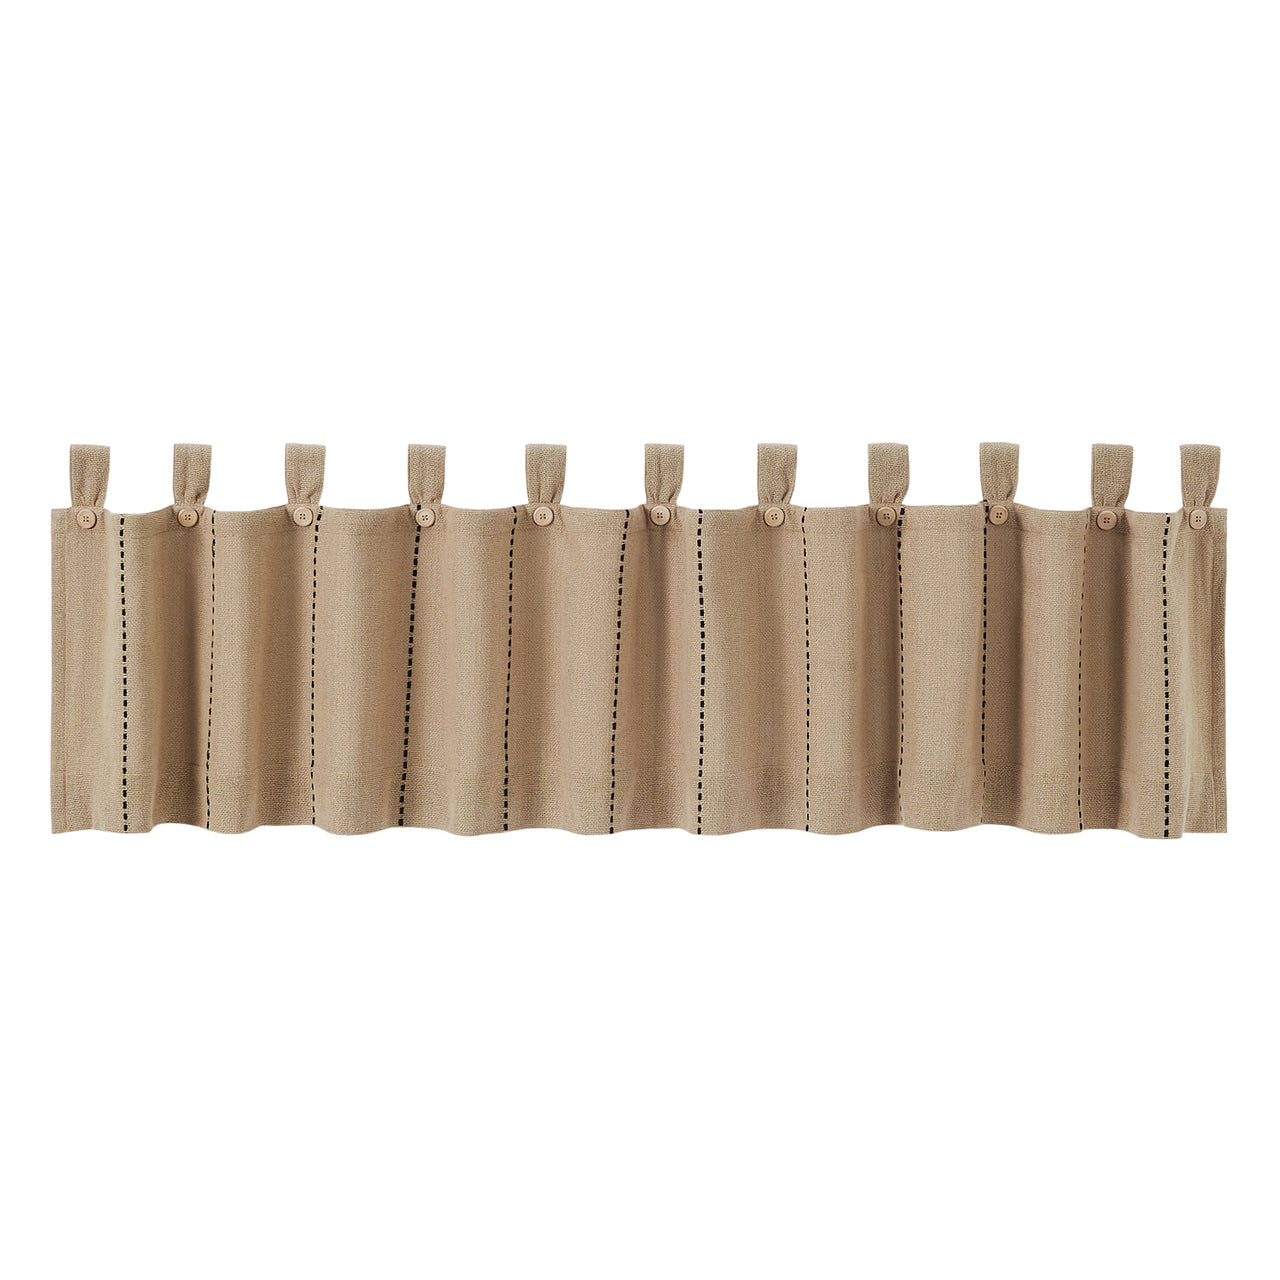 Stitched Burlap Natural Valance Curtain 16x90 VHC Brands